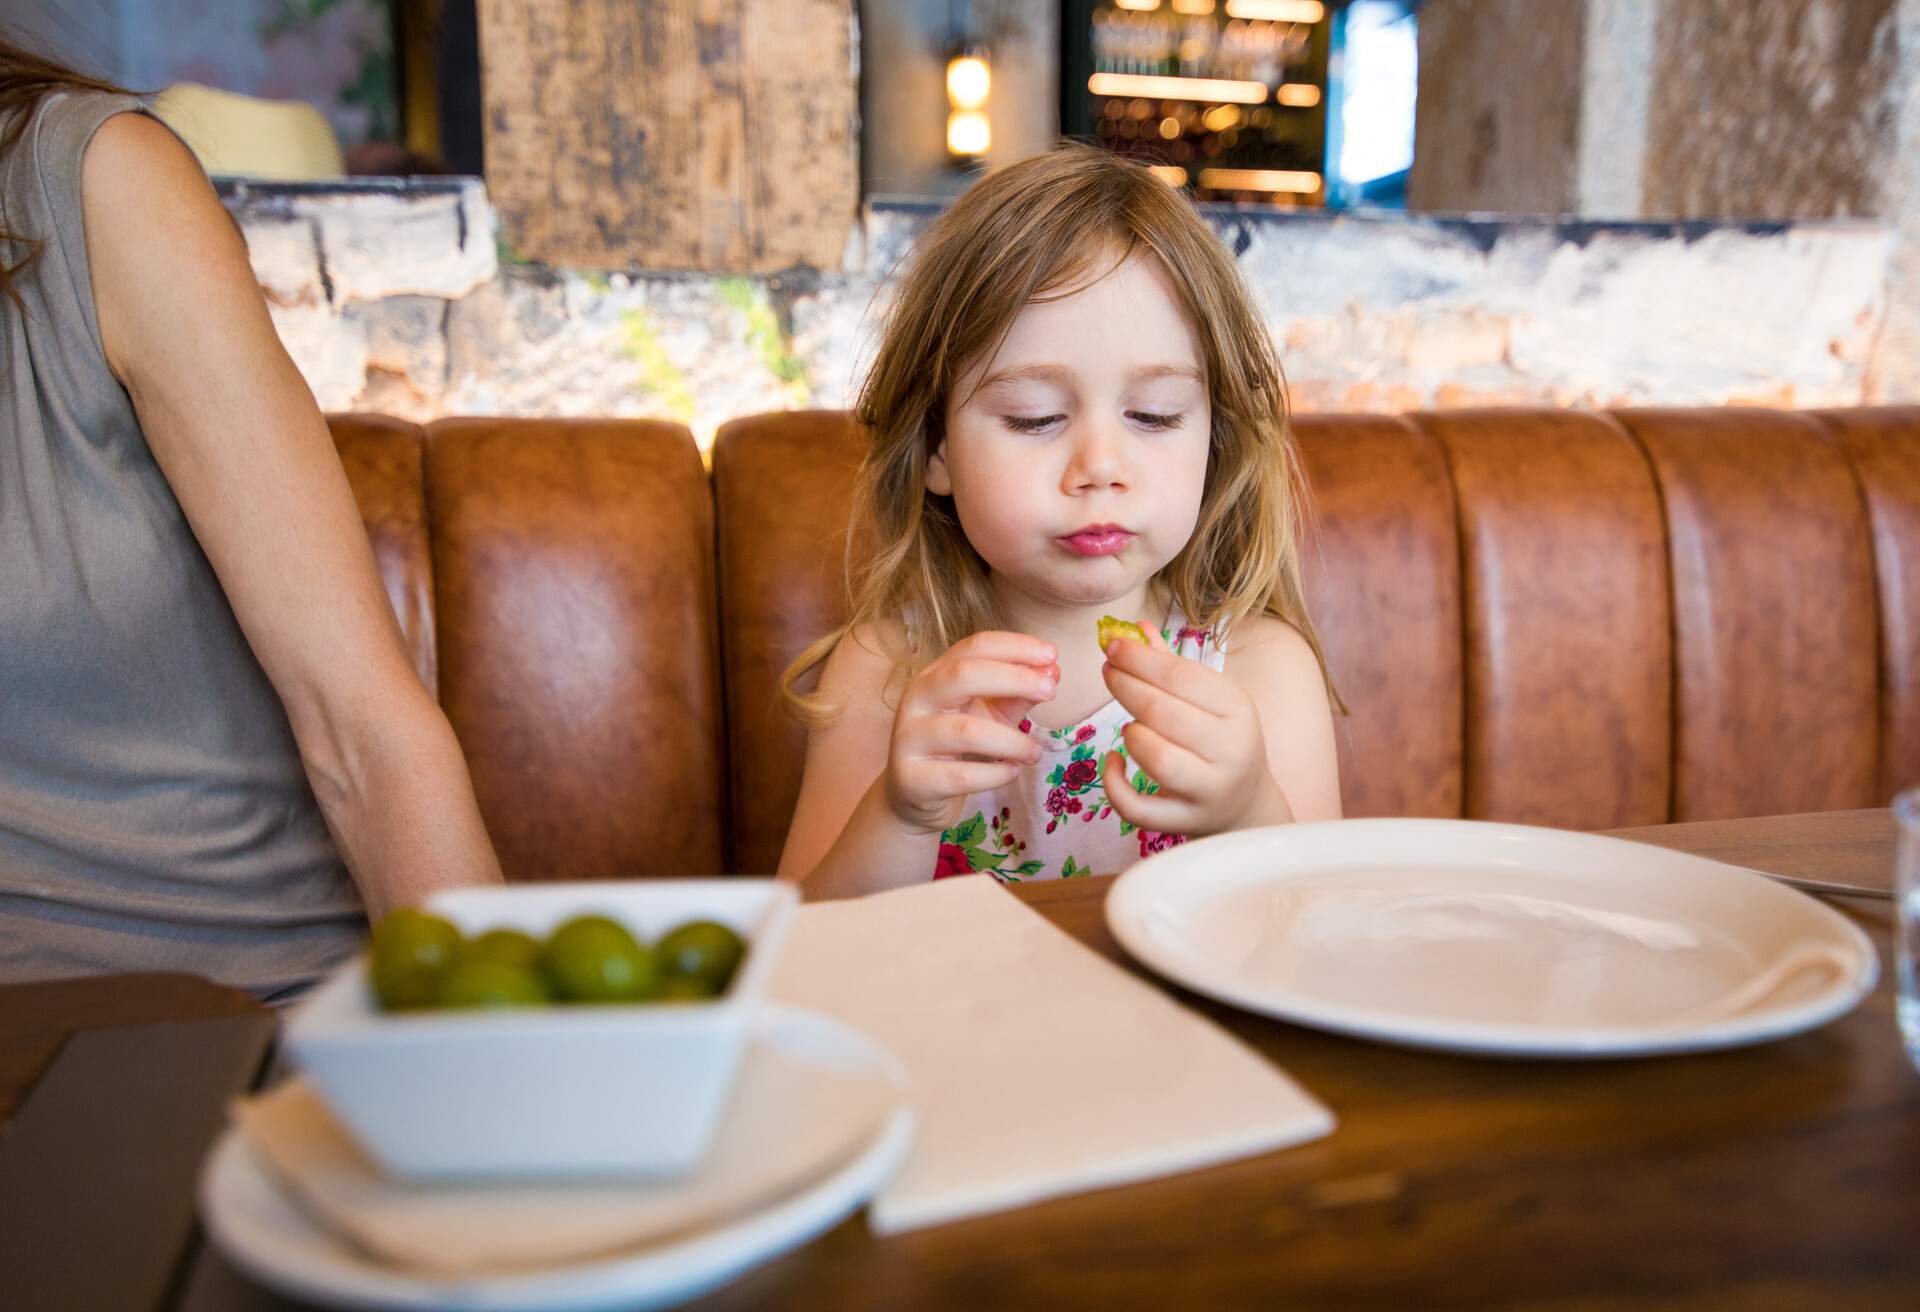 RESTAURANT_PEOPLE_WOMAN_MOTHER_GIRL_DAUGHTER_EATING_OLIVE